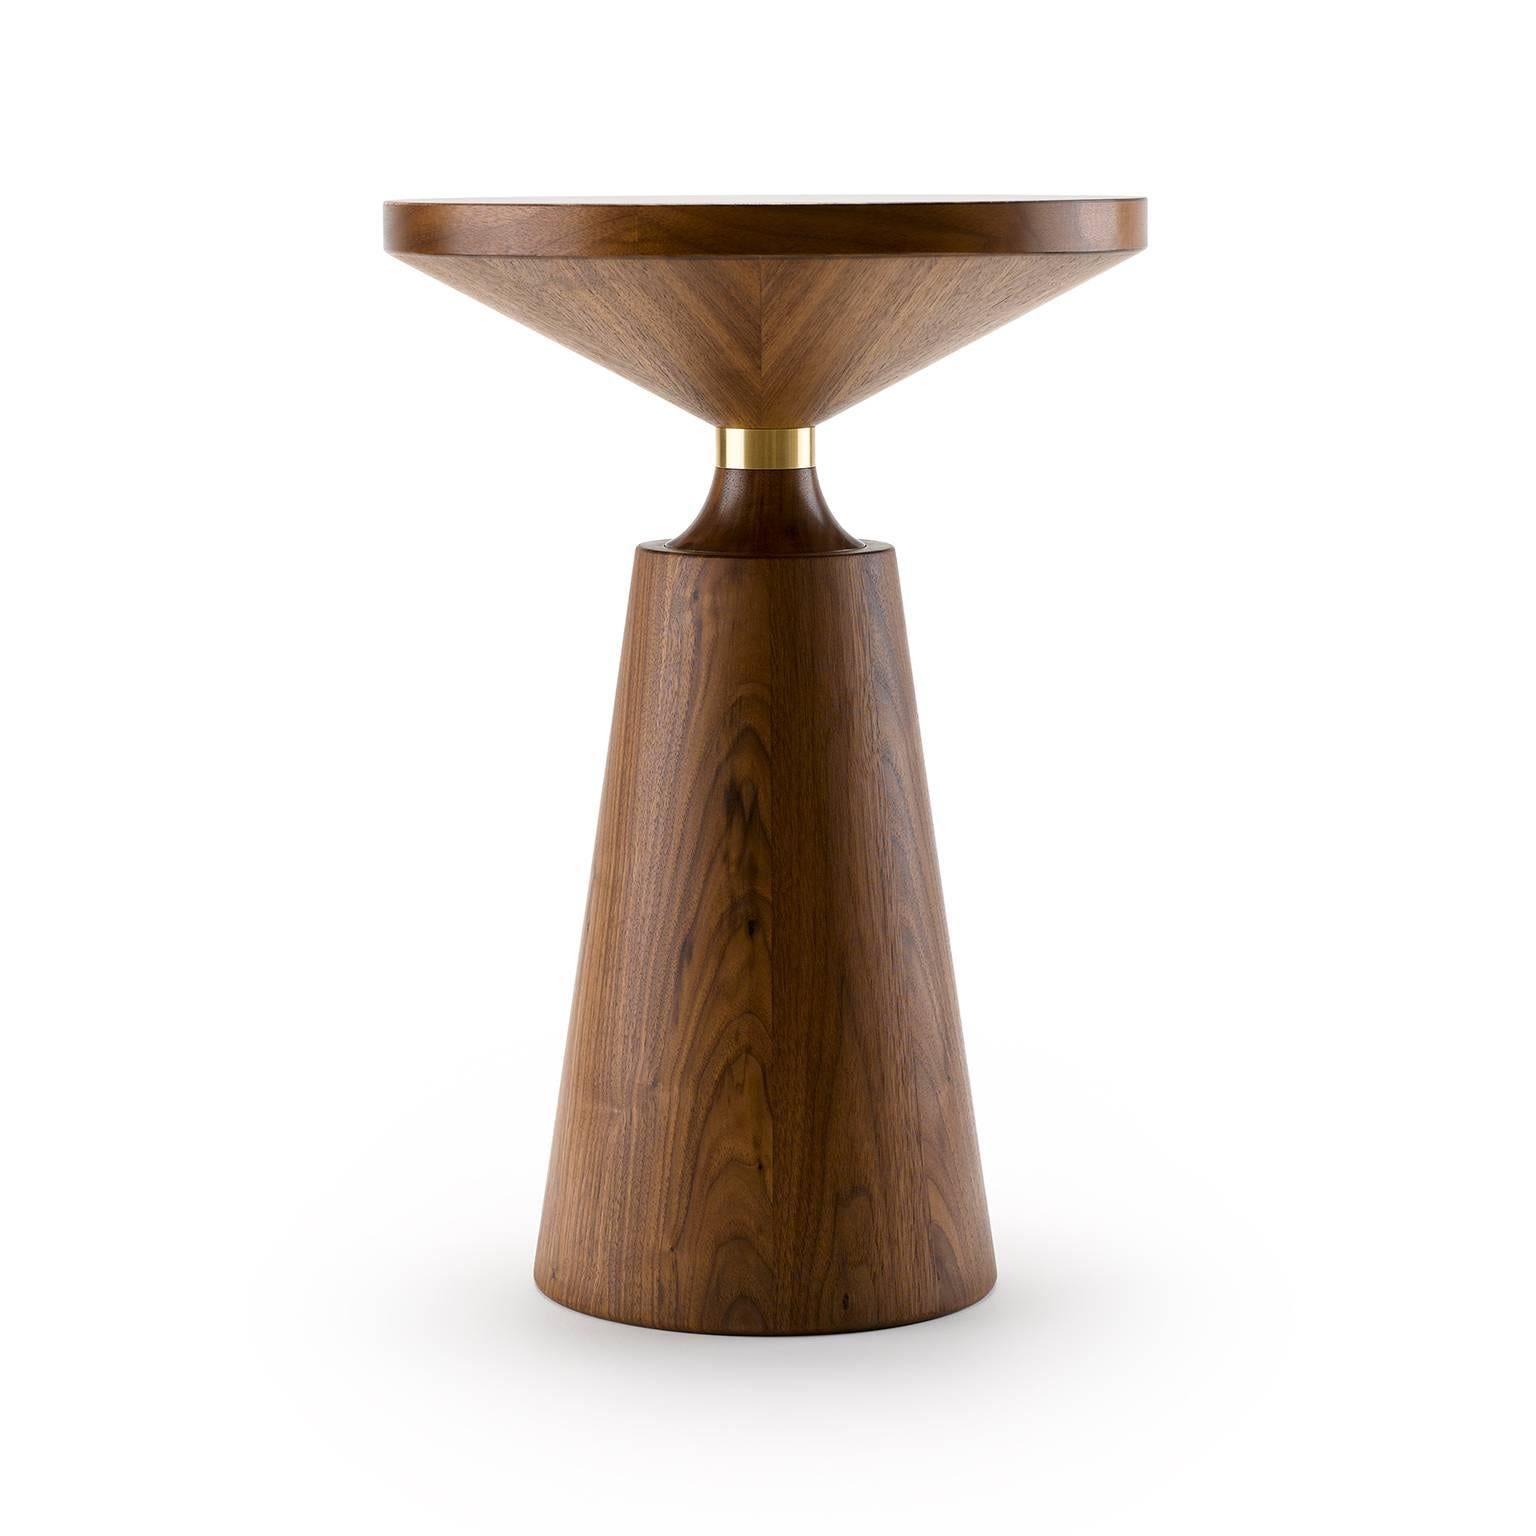 Turned by hand and using both solid and veneered timber, the Nicole Side Table has a simple but graphically striking Silhouette punctuated by the metal collar. The Nicole Side Table is shown here in natural oiled walnut with natural brass (front)